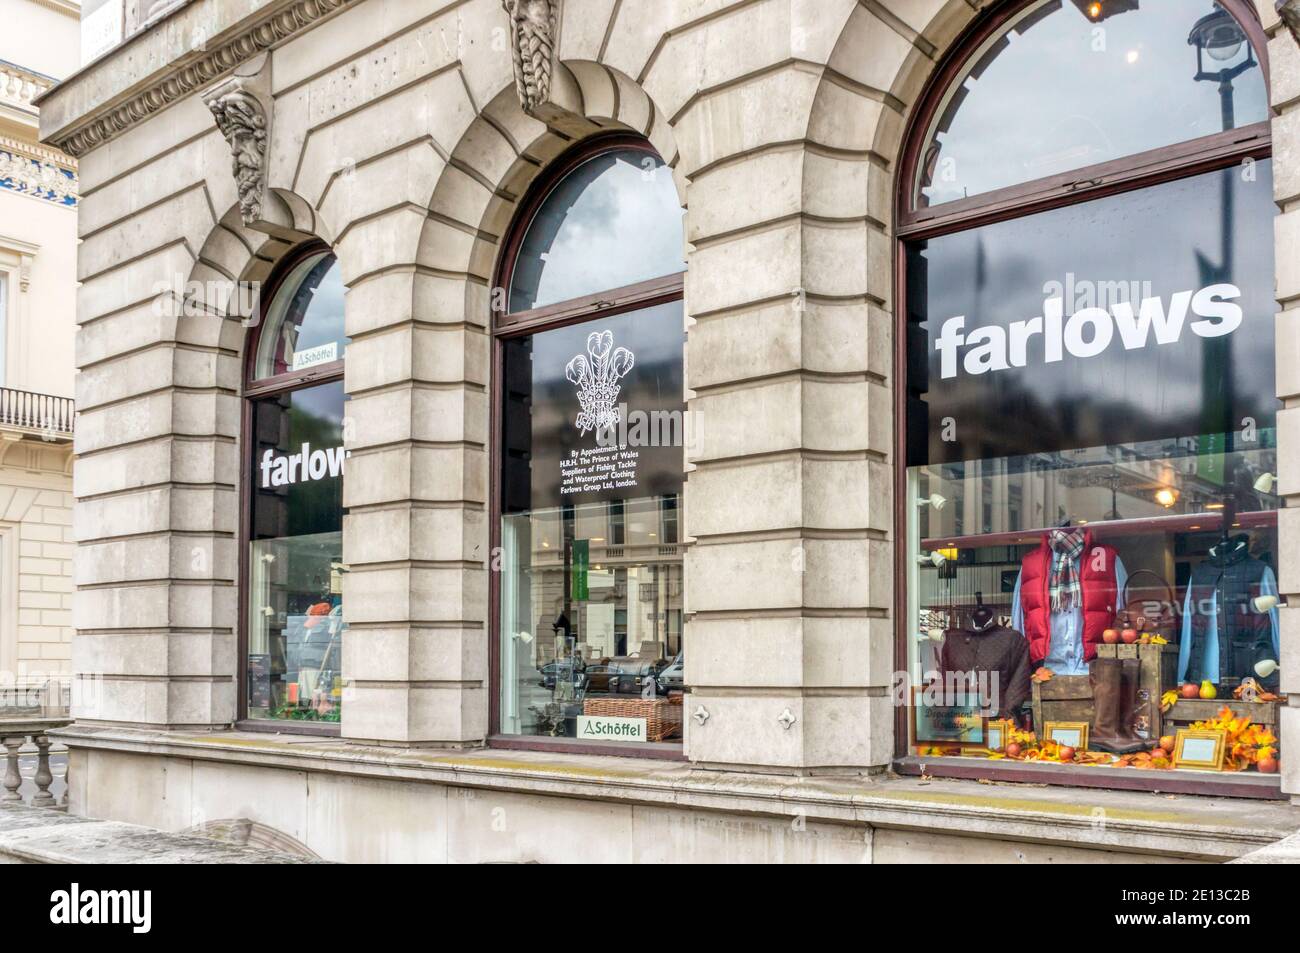 Farlows fishing, shooting & country clothing shop in Pall Mall, London. Stock Photo